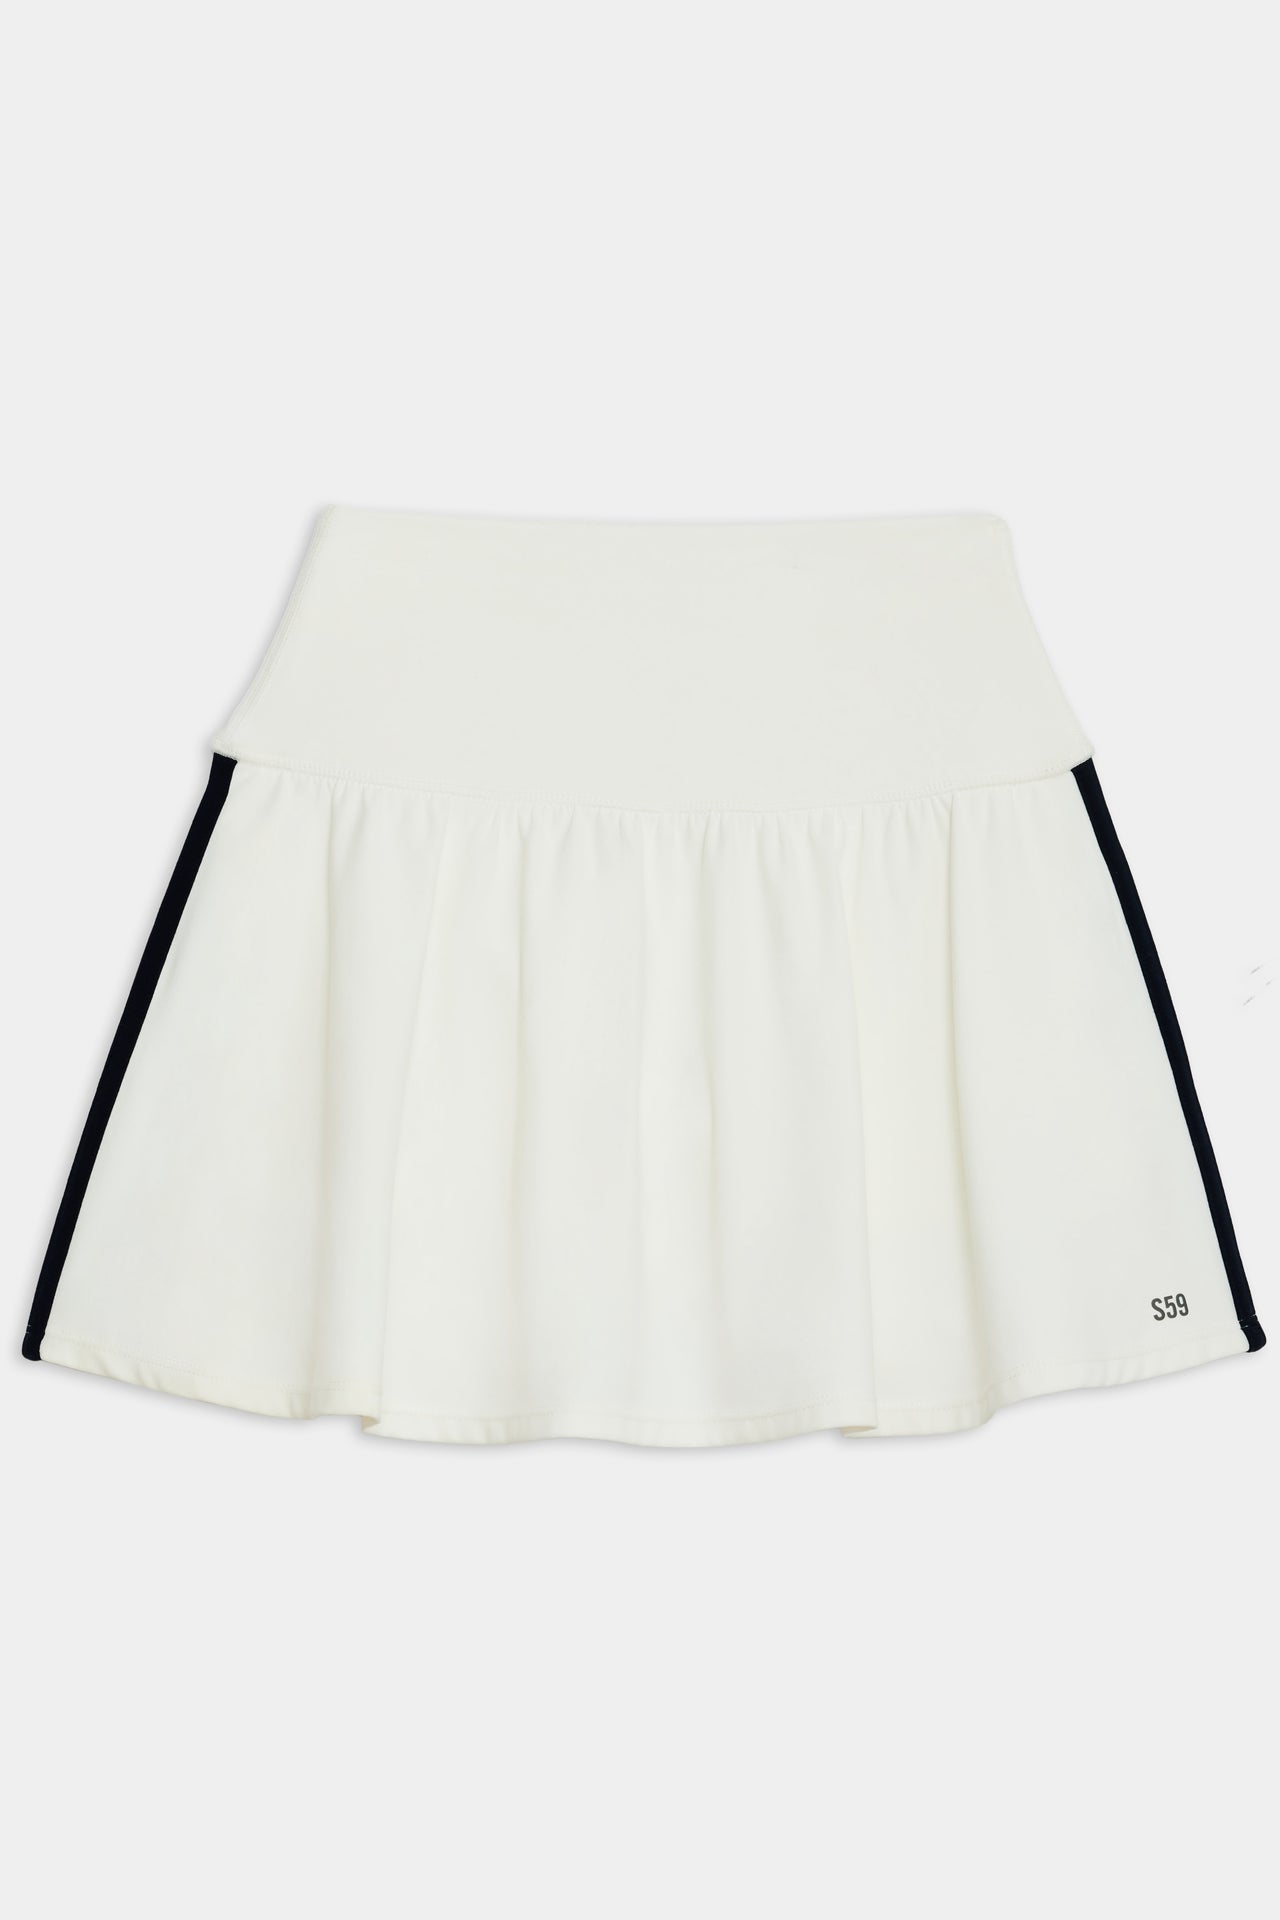 Flat view of white upper thigh skirt with built in shorts, with two black stripes going down the side 